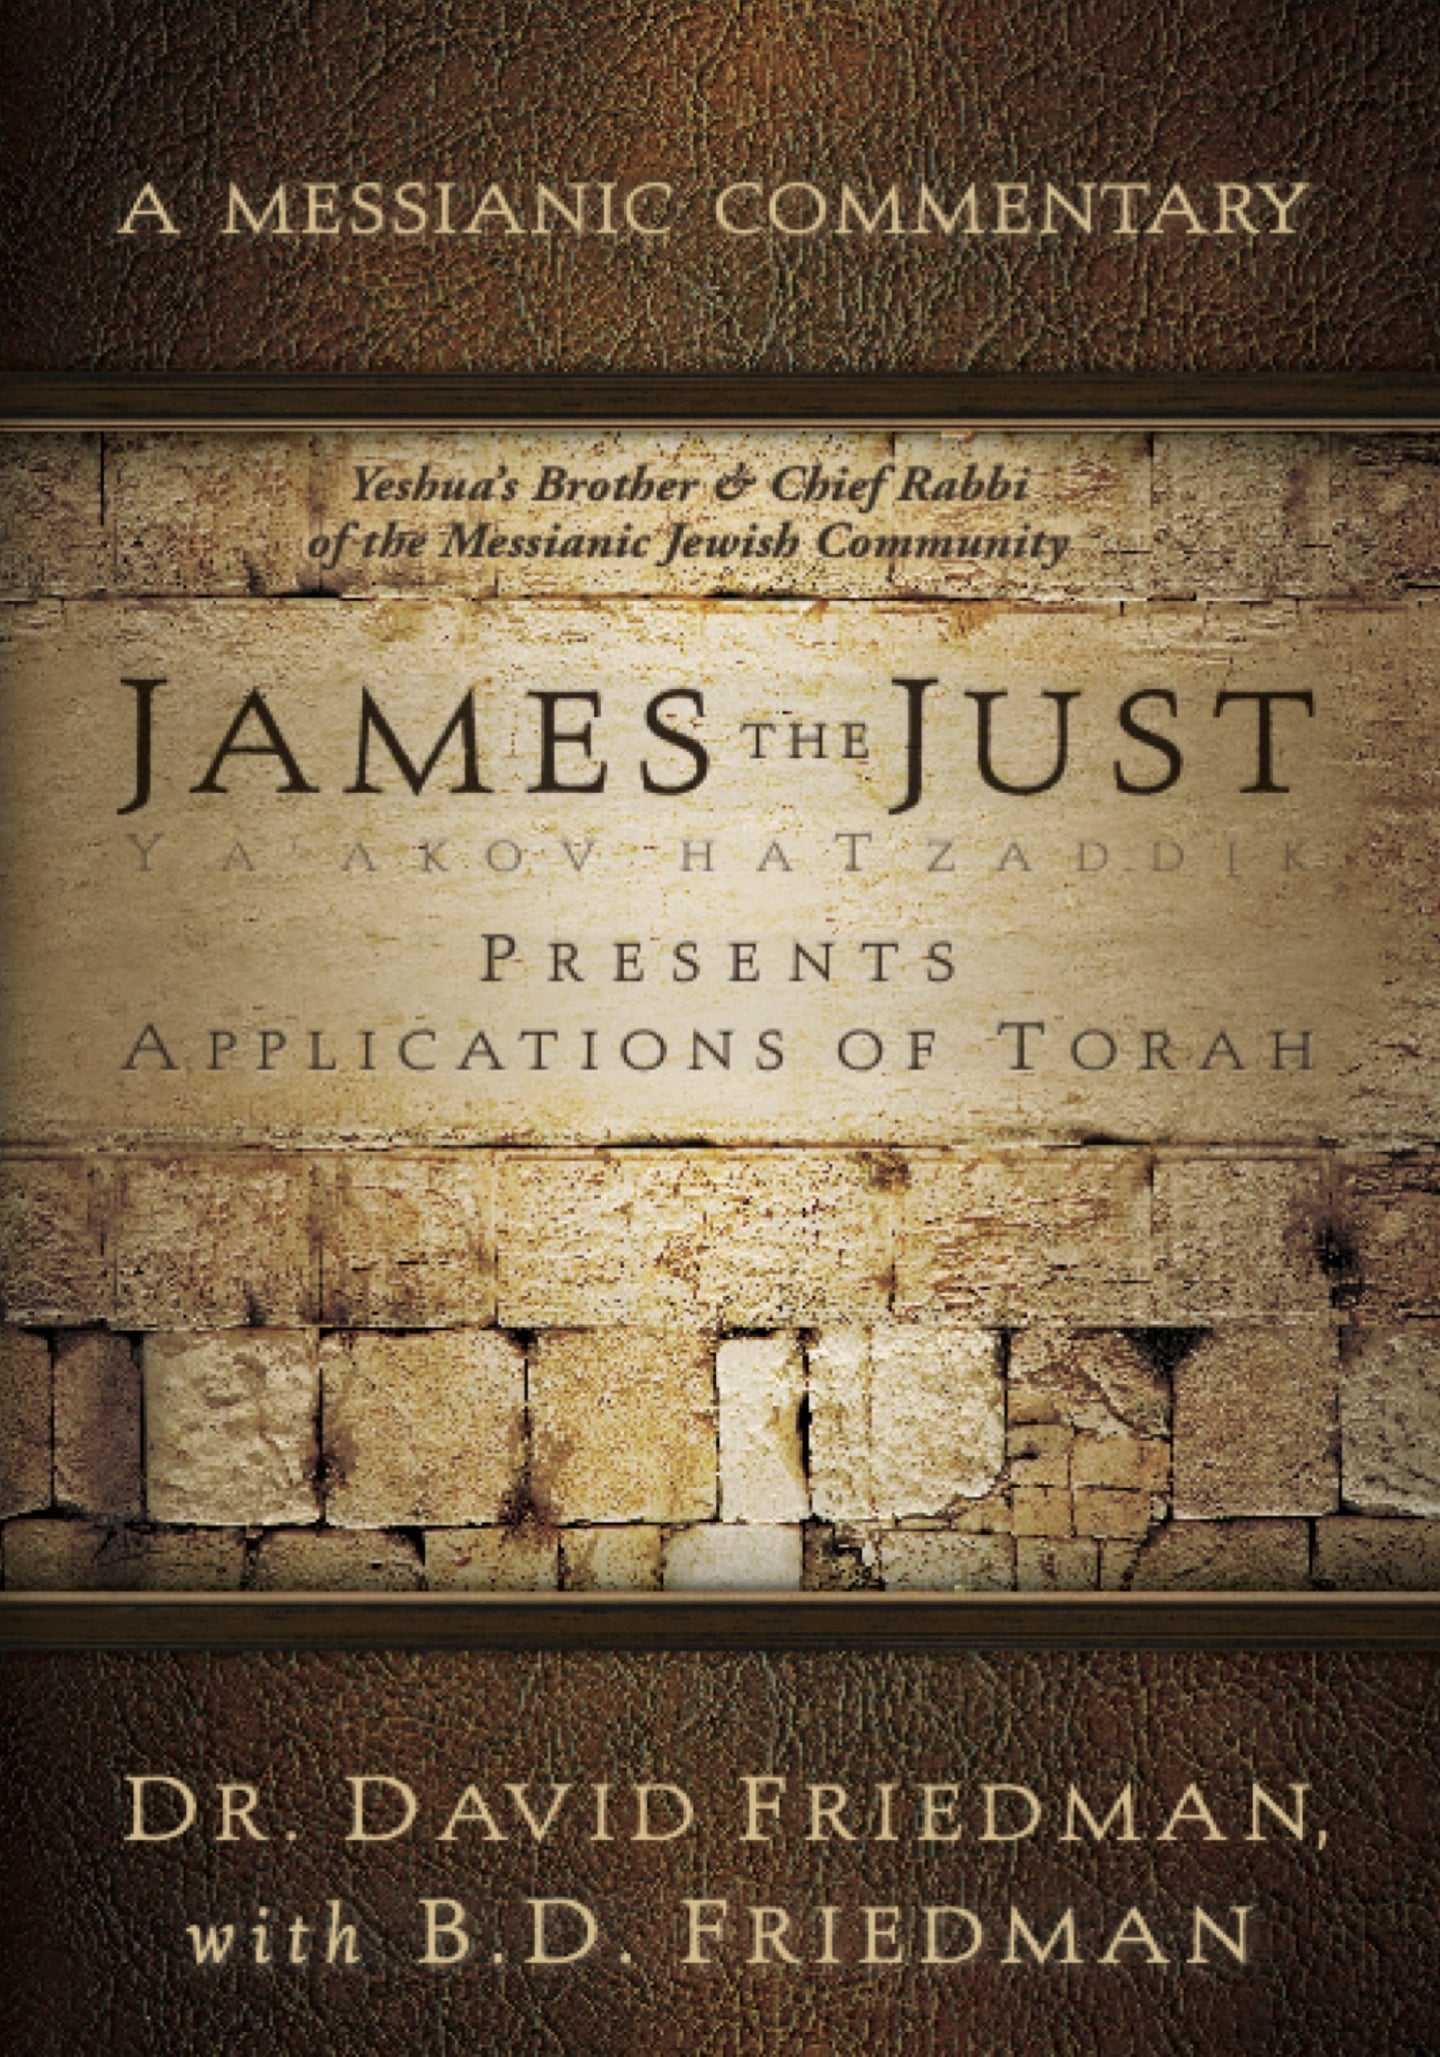 book of james commentary